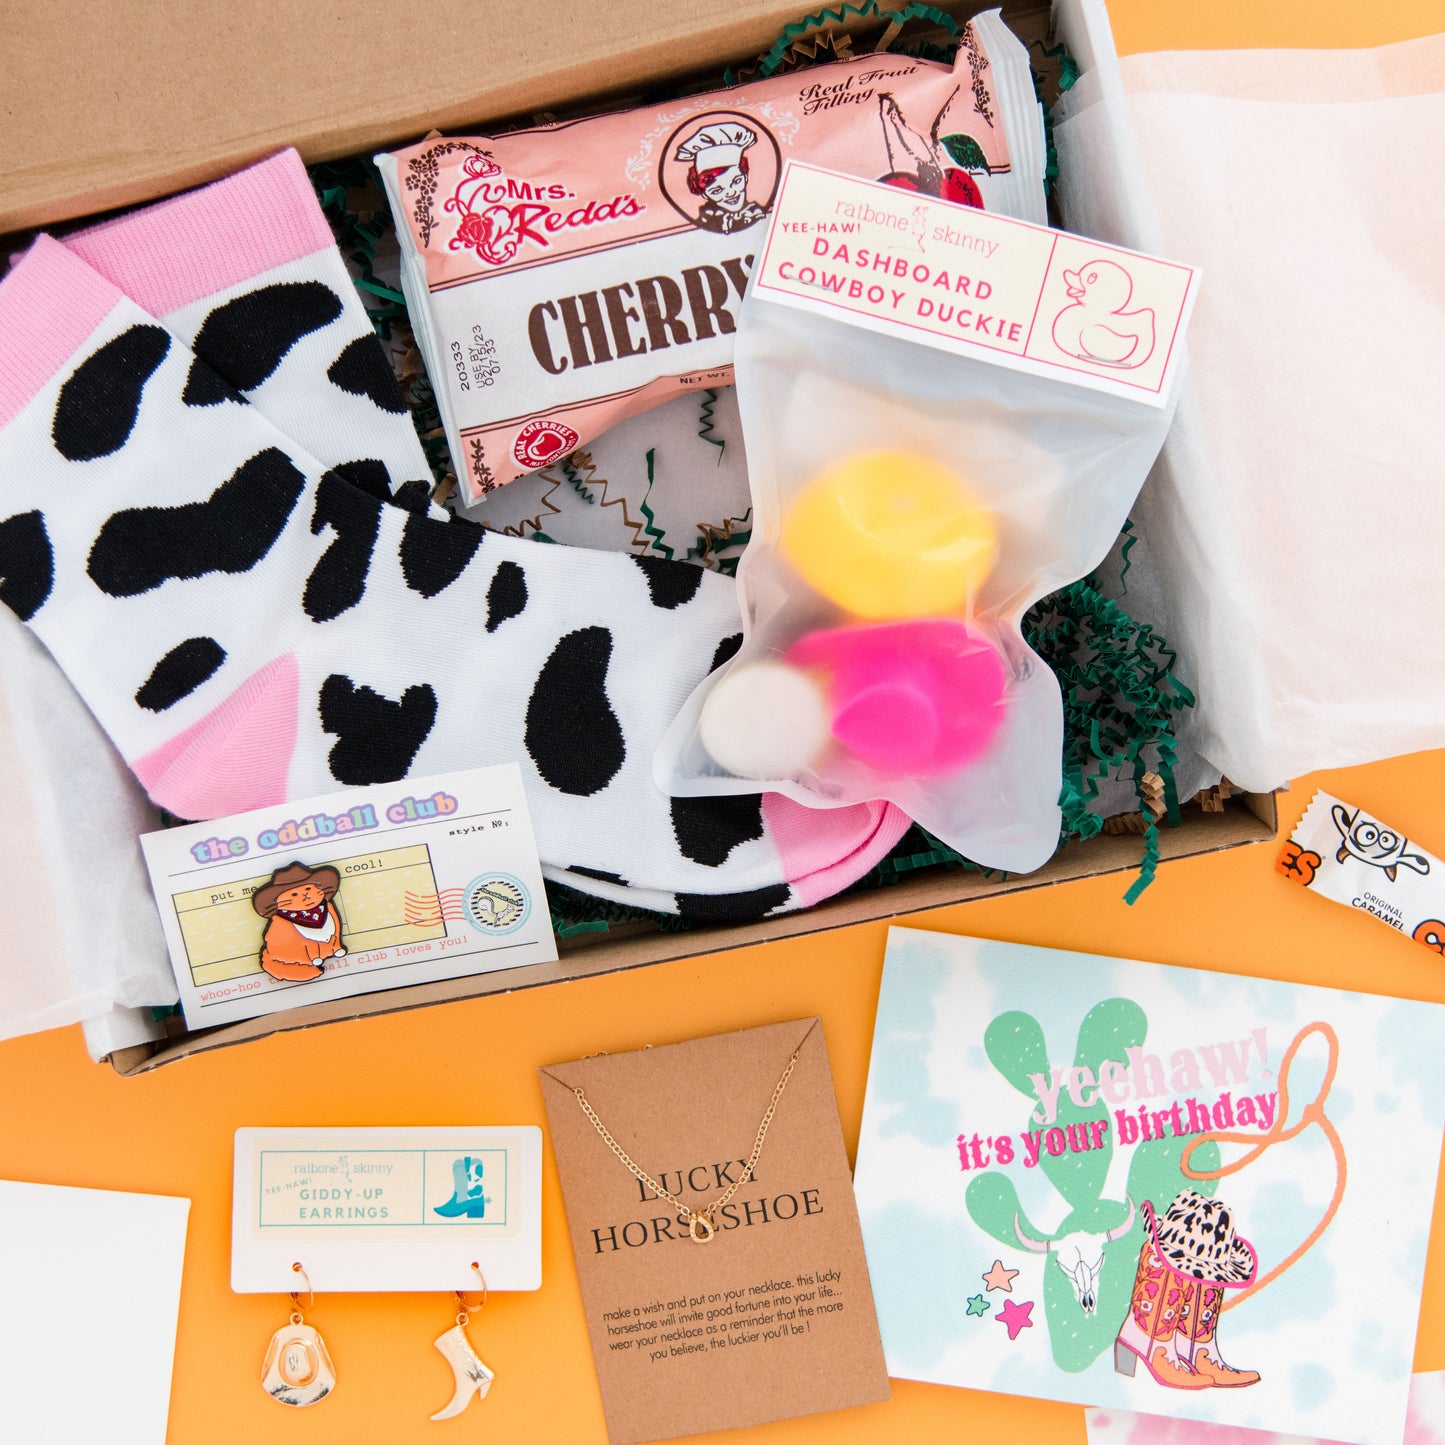 Get your cowboy on with our western-themed subscription box! Featuring a dashboard duckie for your car, a yeehaw greeting card, cow boy hat earrings, lucky horshoe necklace, and cat with bandana and cowboy hat enamel pin. Perfect for those who love all things western and want to add some country charm to their life.